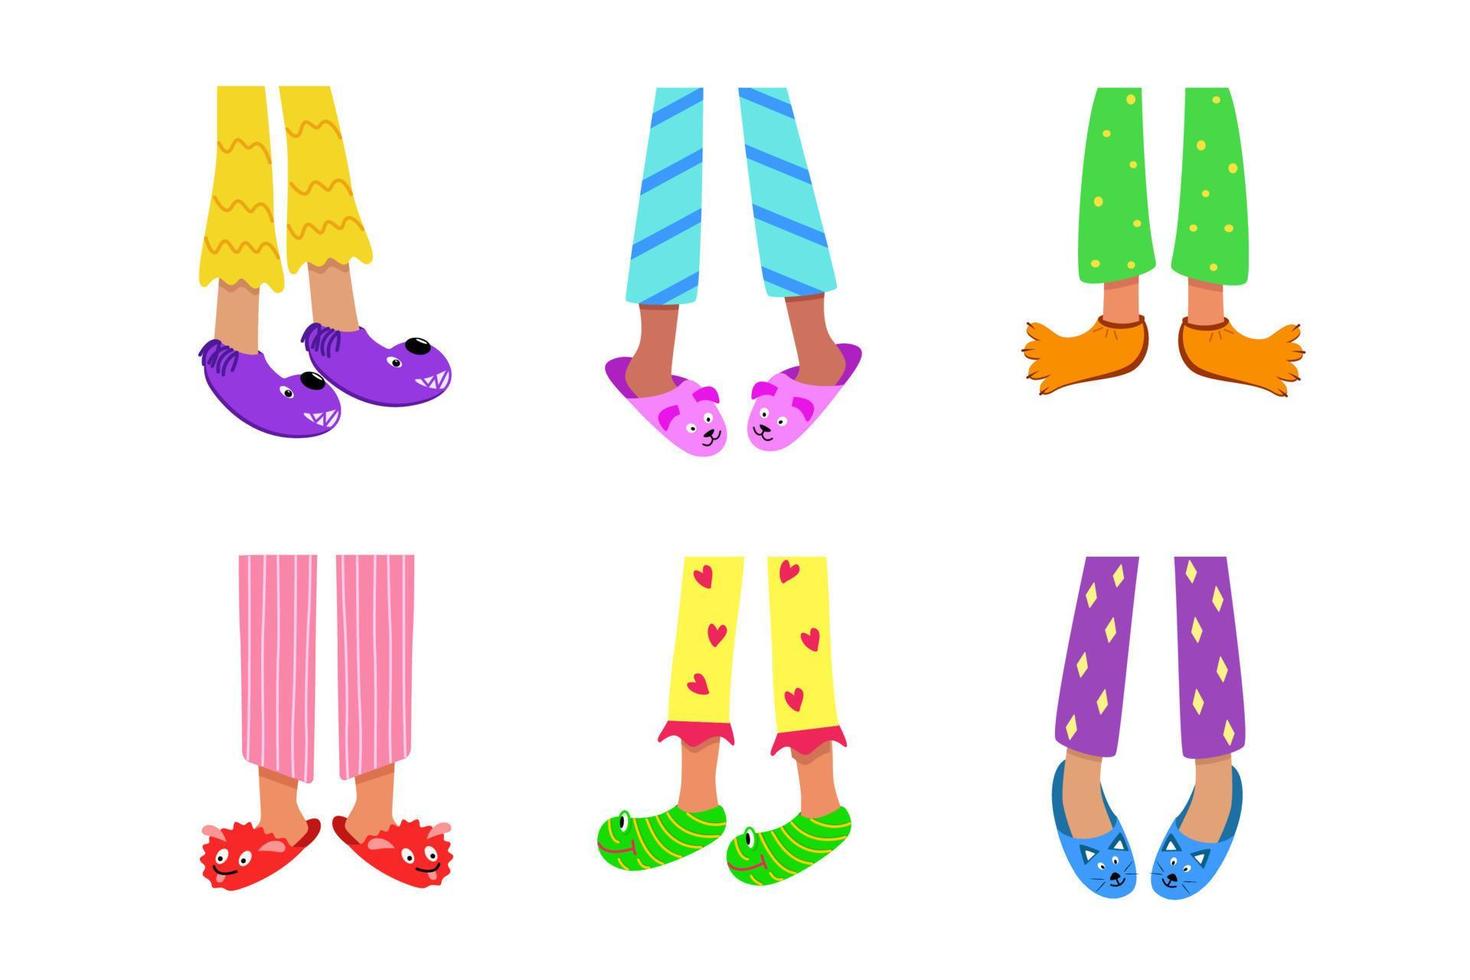 Children's feet in colored pajamas and funny slippers. Vector illustration of home sleeping clothes and shoes. The concept of a pajama party